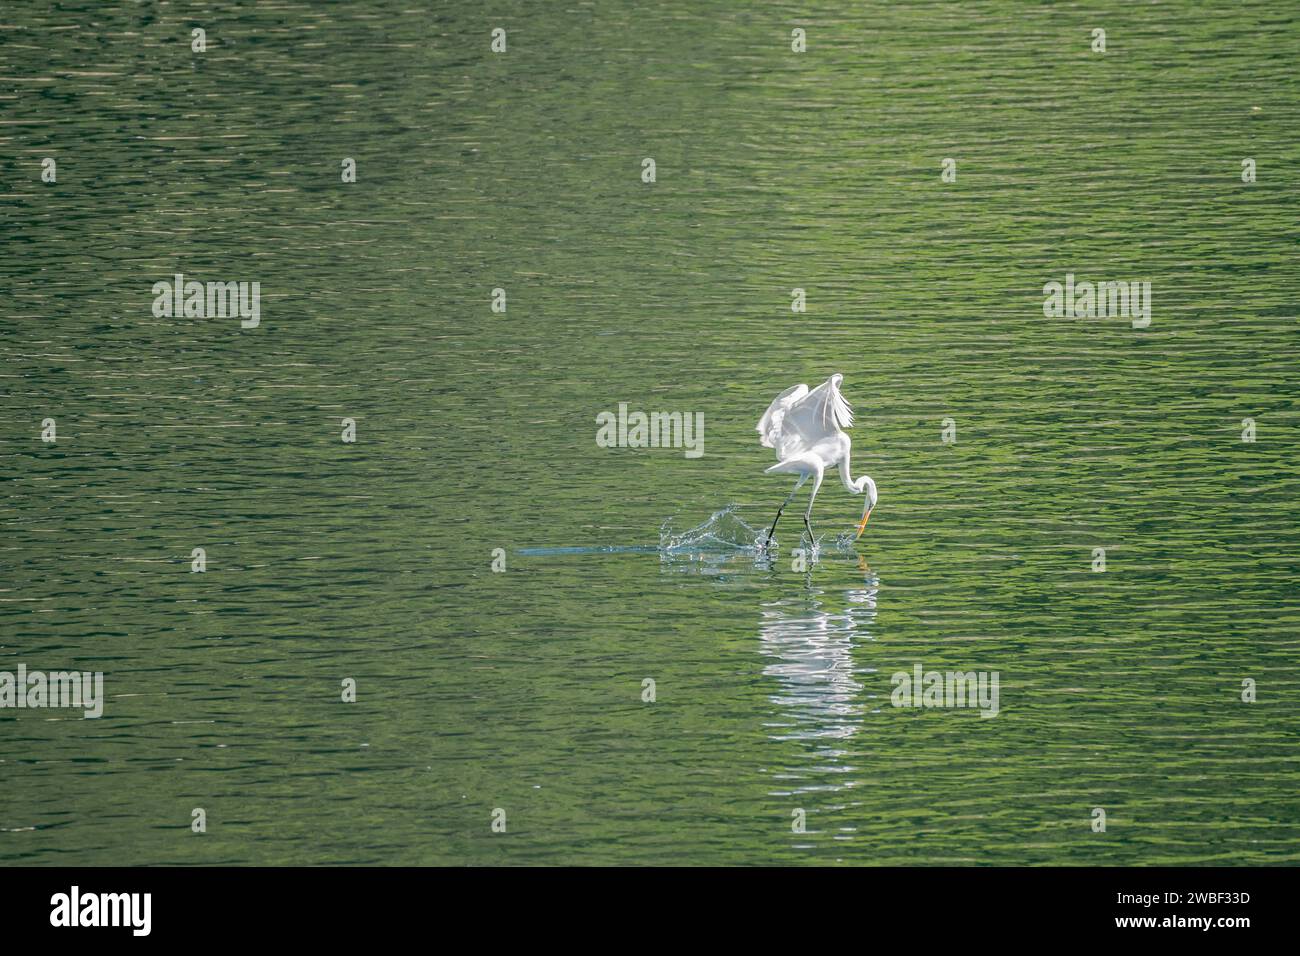 Large white egret looks like it is walking on water as it catches a small fish in its beak Stock Photo